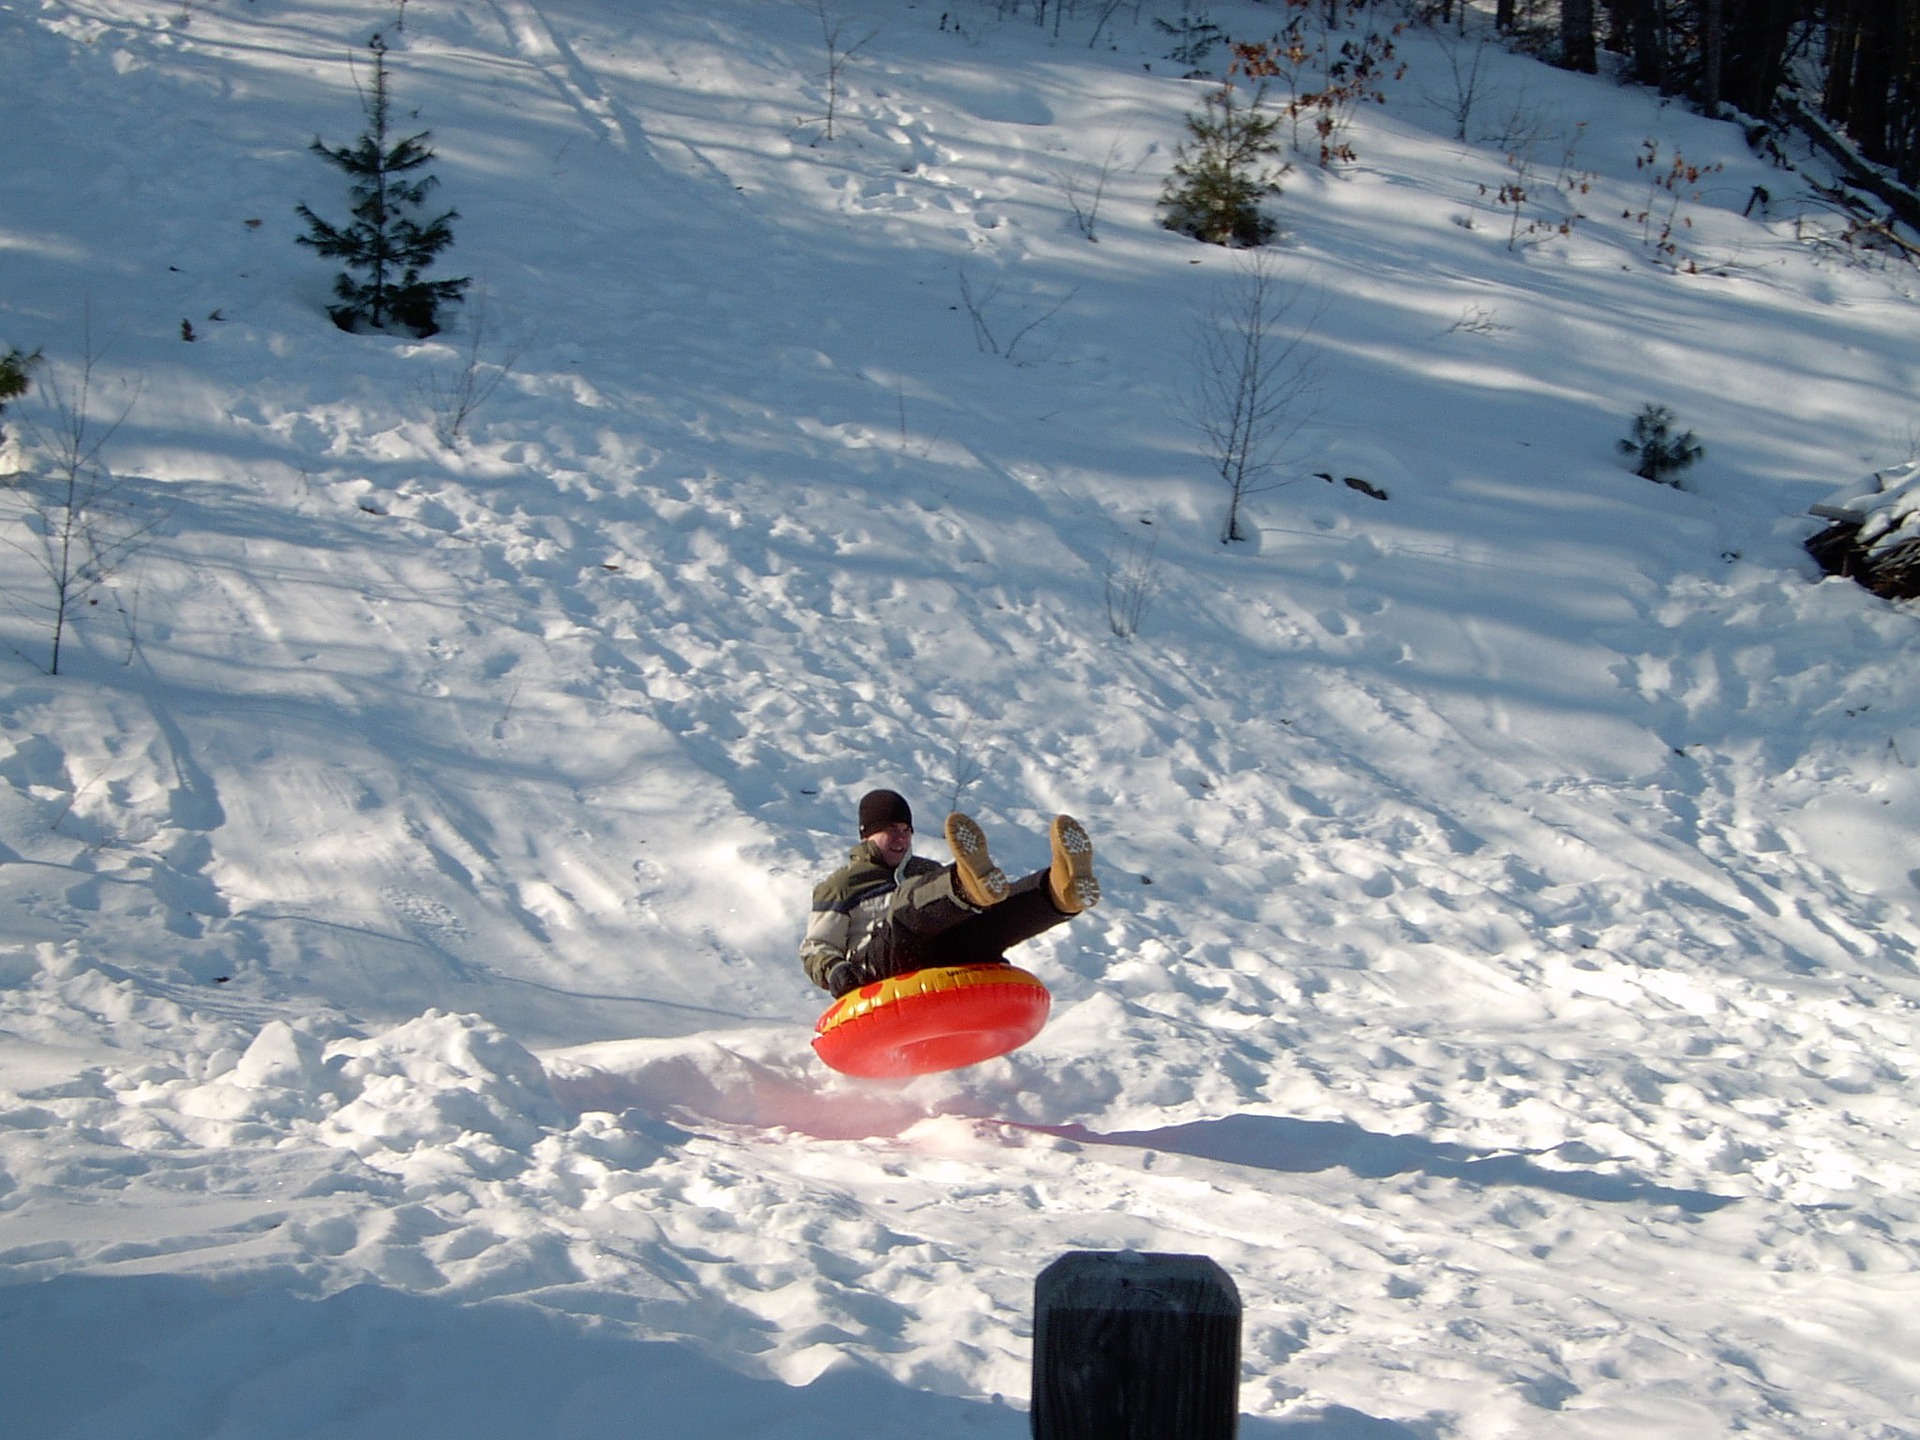 Enjoy tubing and your list of Winter Park events